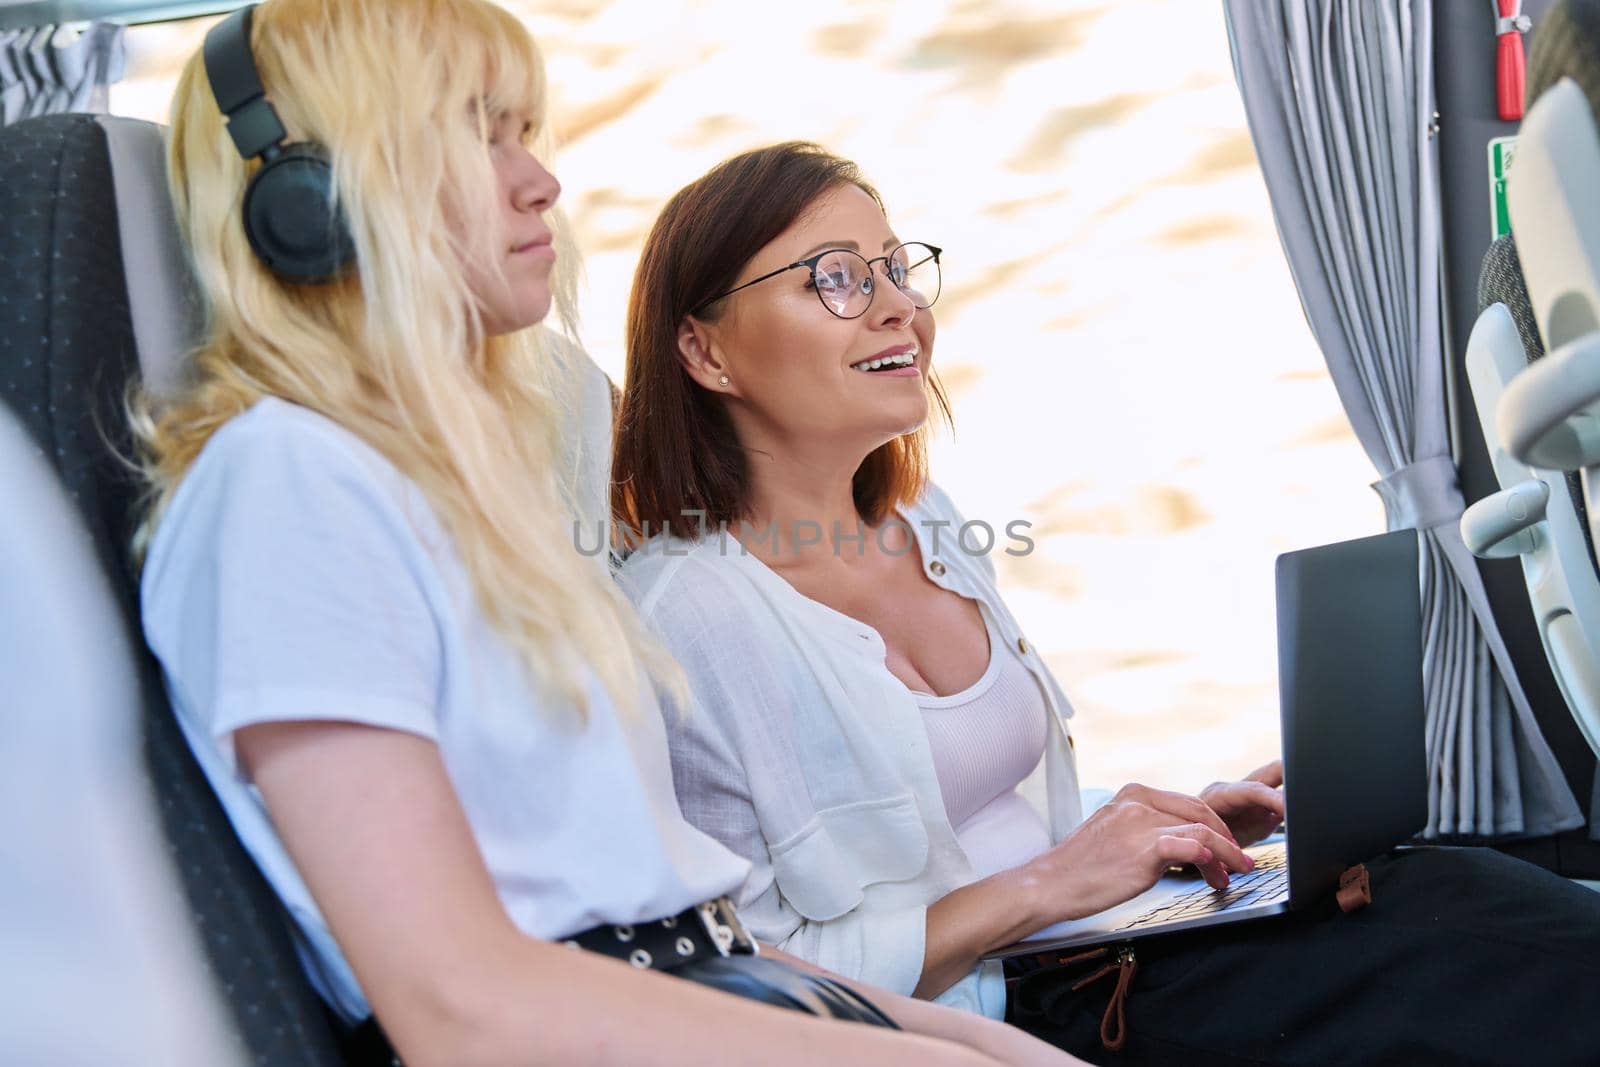 Middle-aged woman in bus using laptop. Female on bus ride working on laptop. Lifestyle, technology, travel, freelance, remote work study concept